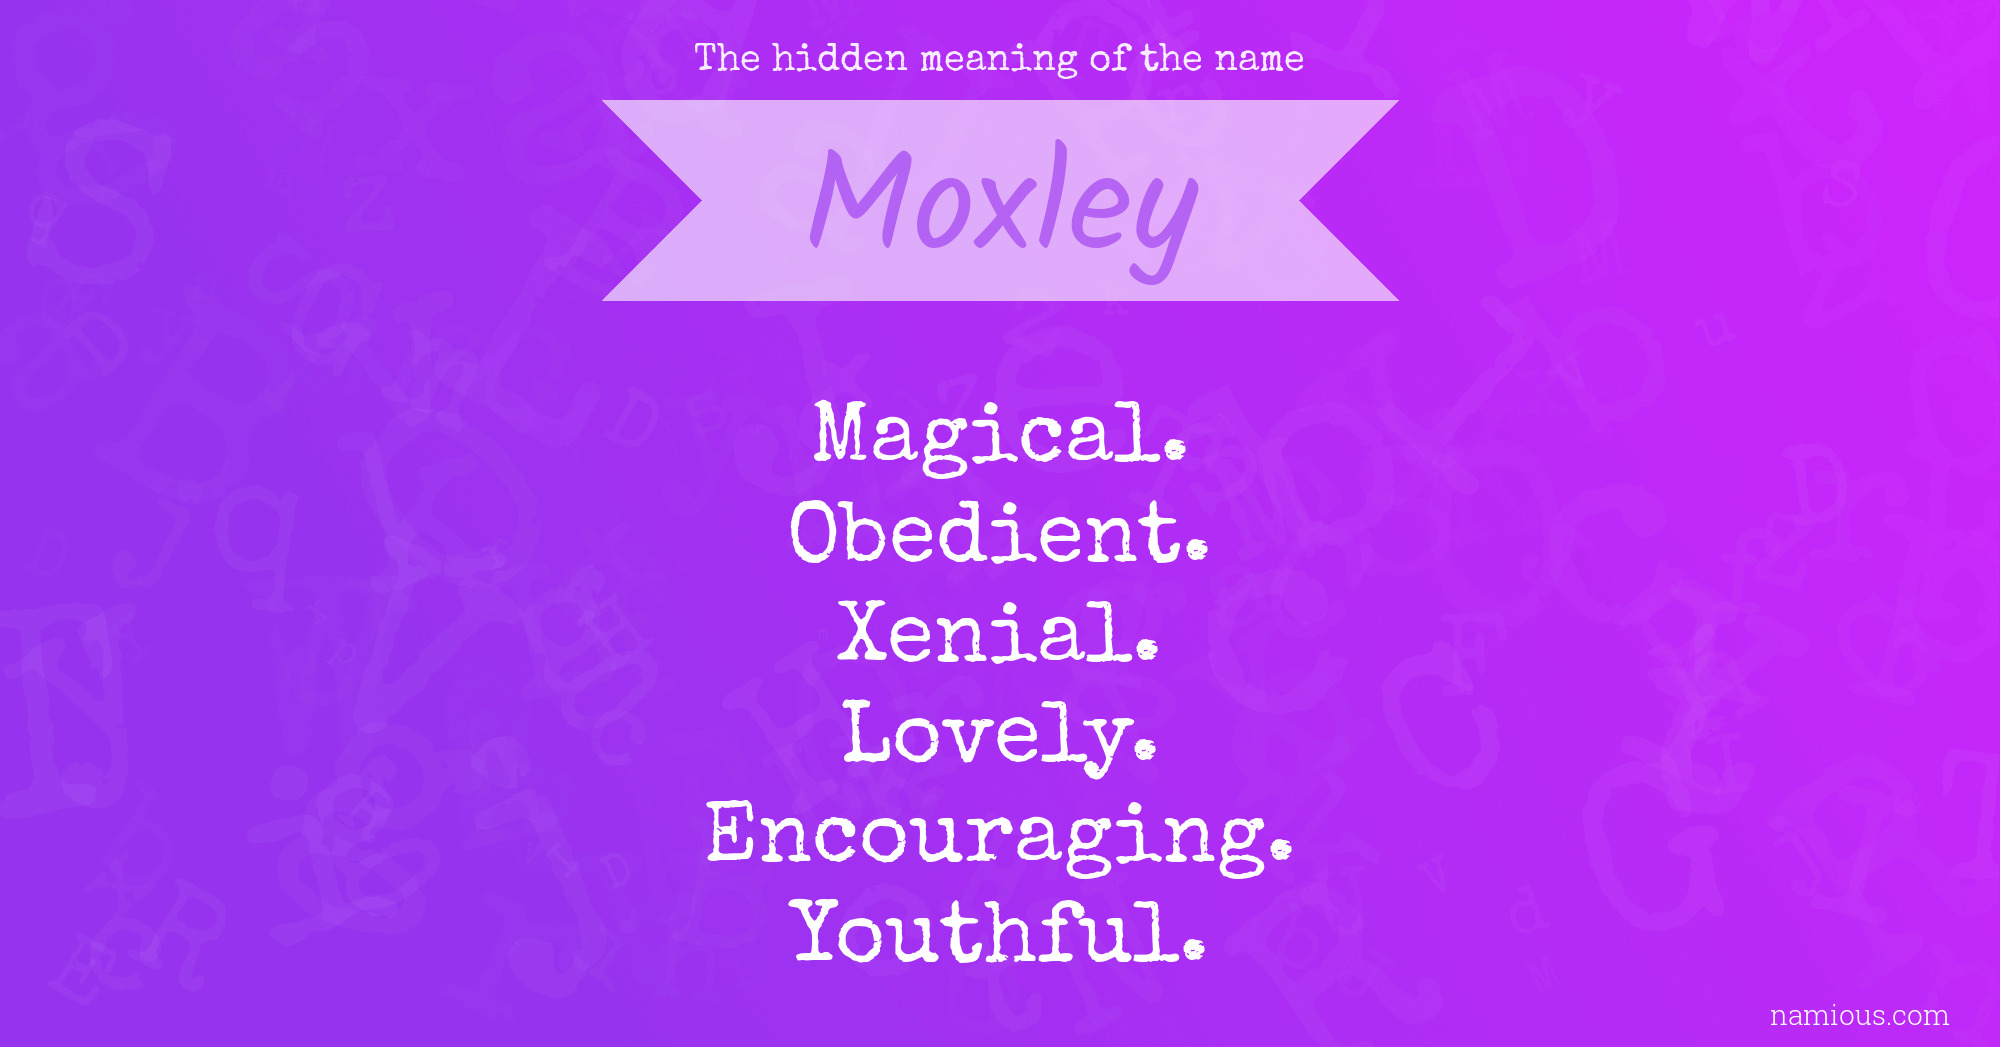 The hidden meaning of the name Moxley